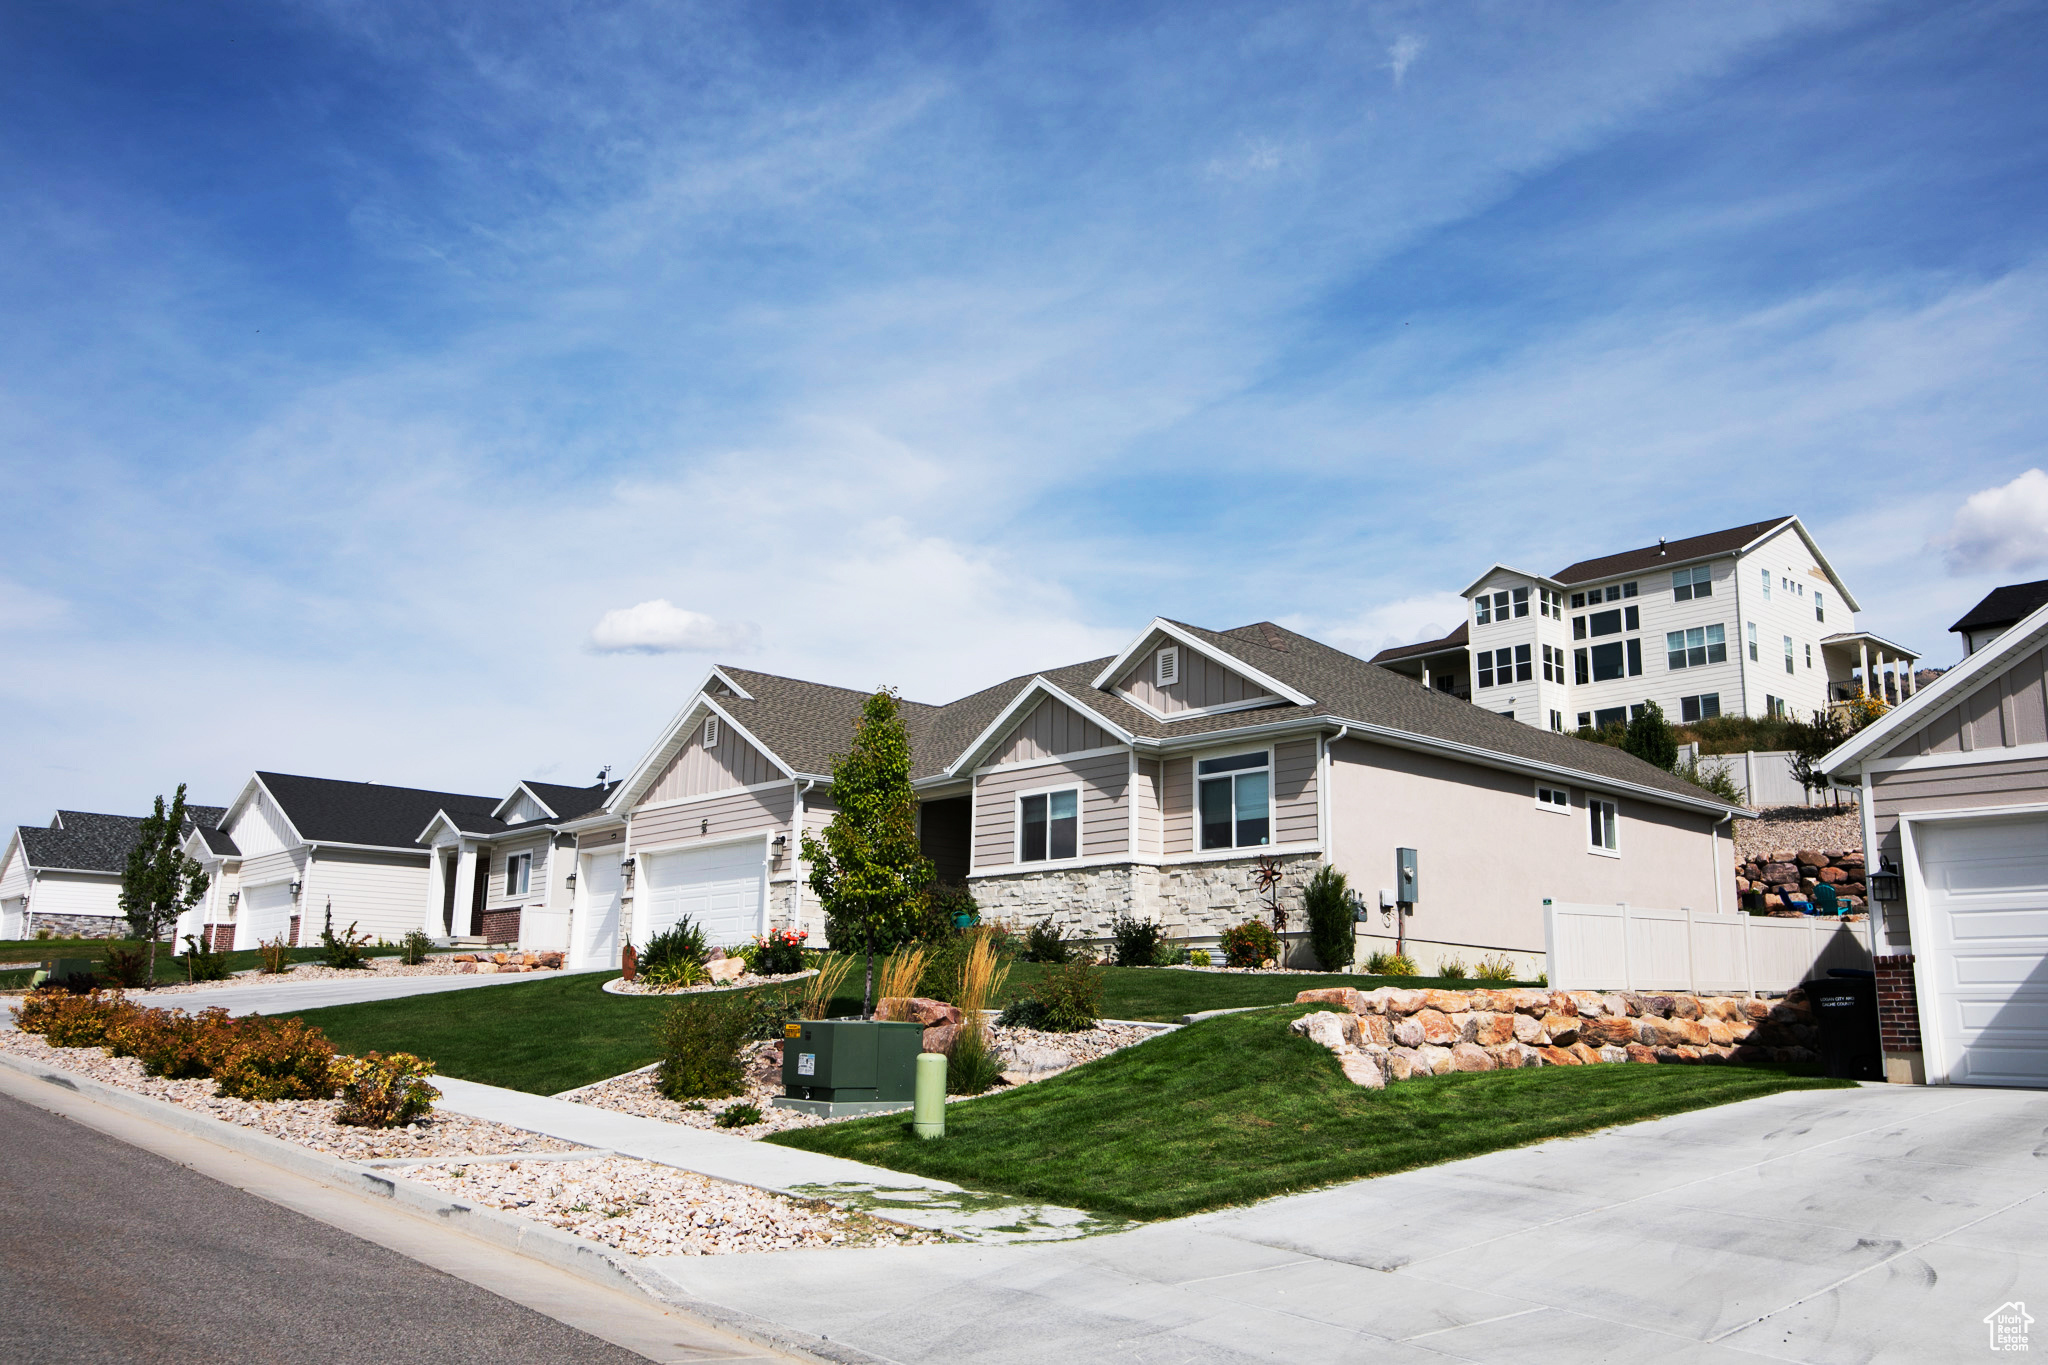 36 S 900 E, Hyde Park, Utah 84318, 5 Bedrooms Bedrooms, 13 Rooms Rooms,Residential,For sale,900,1989923